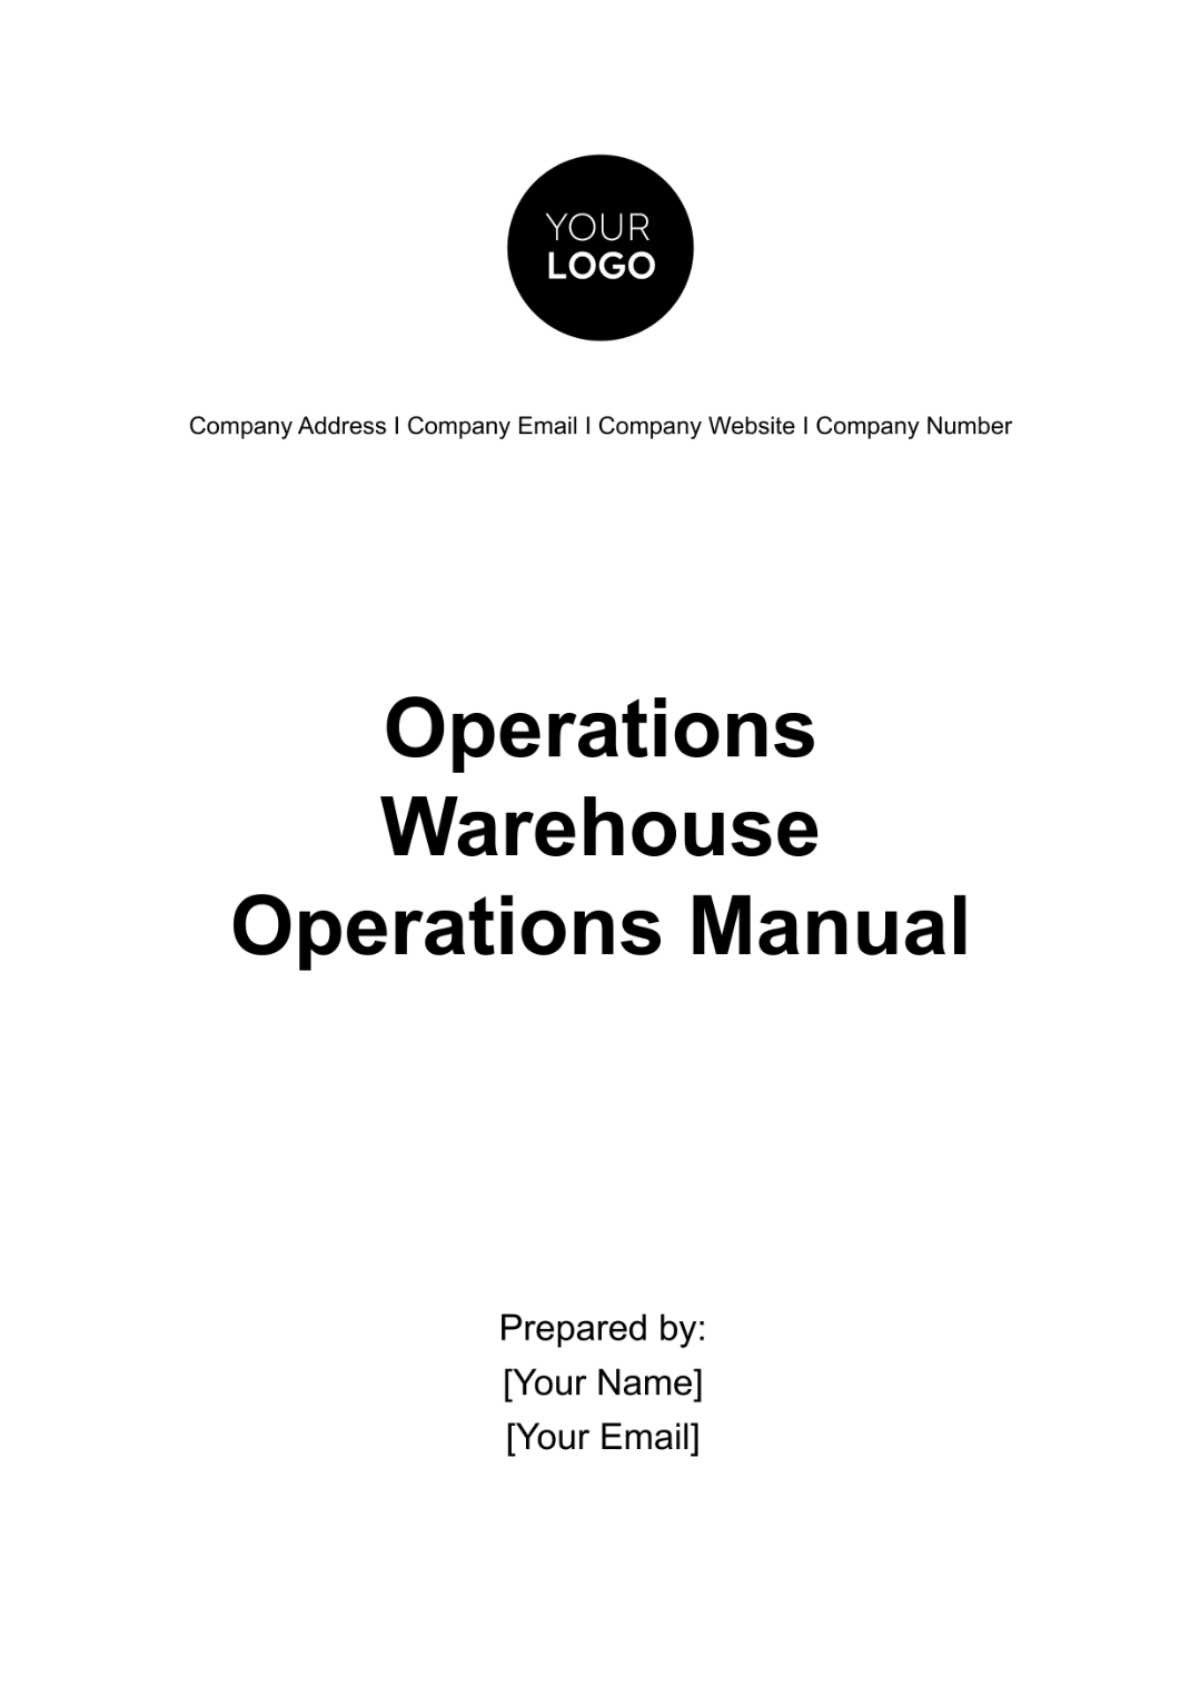 Operations Warehouse Operations Manual Template